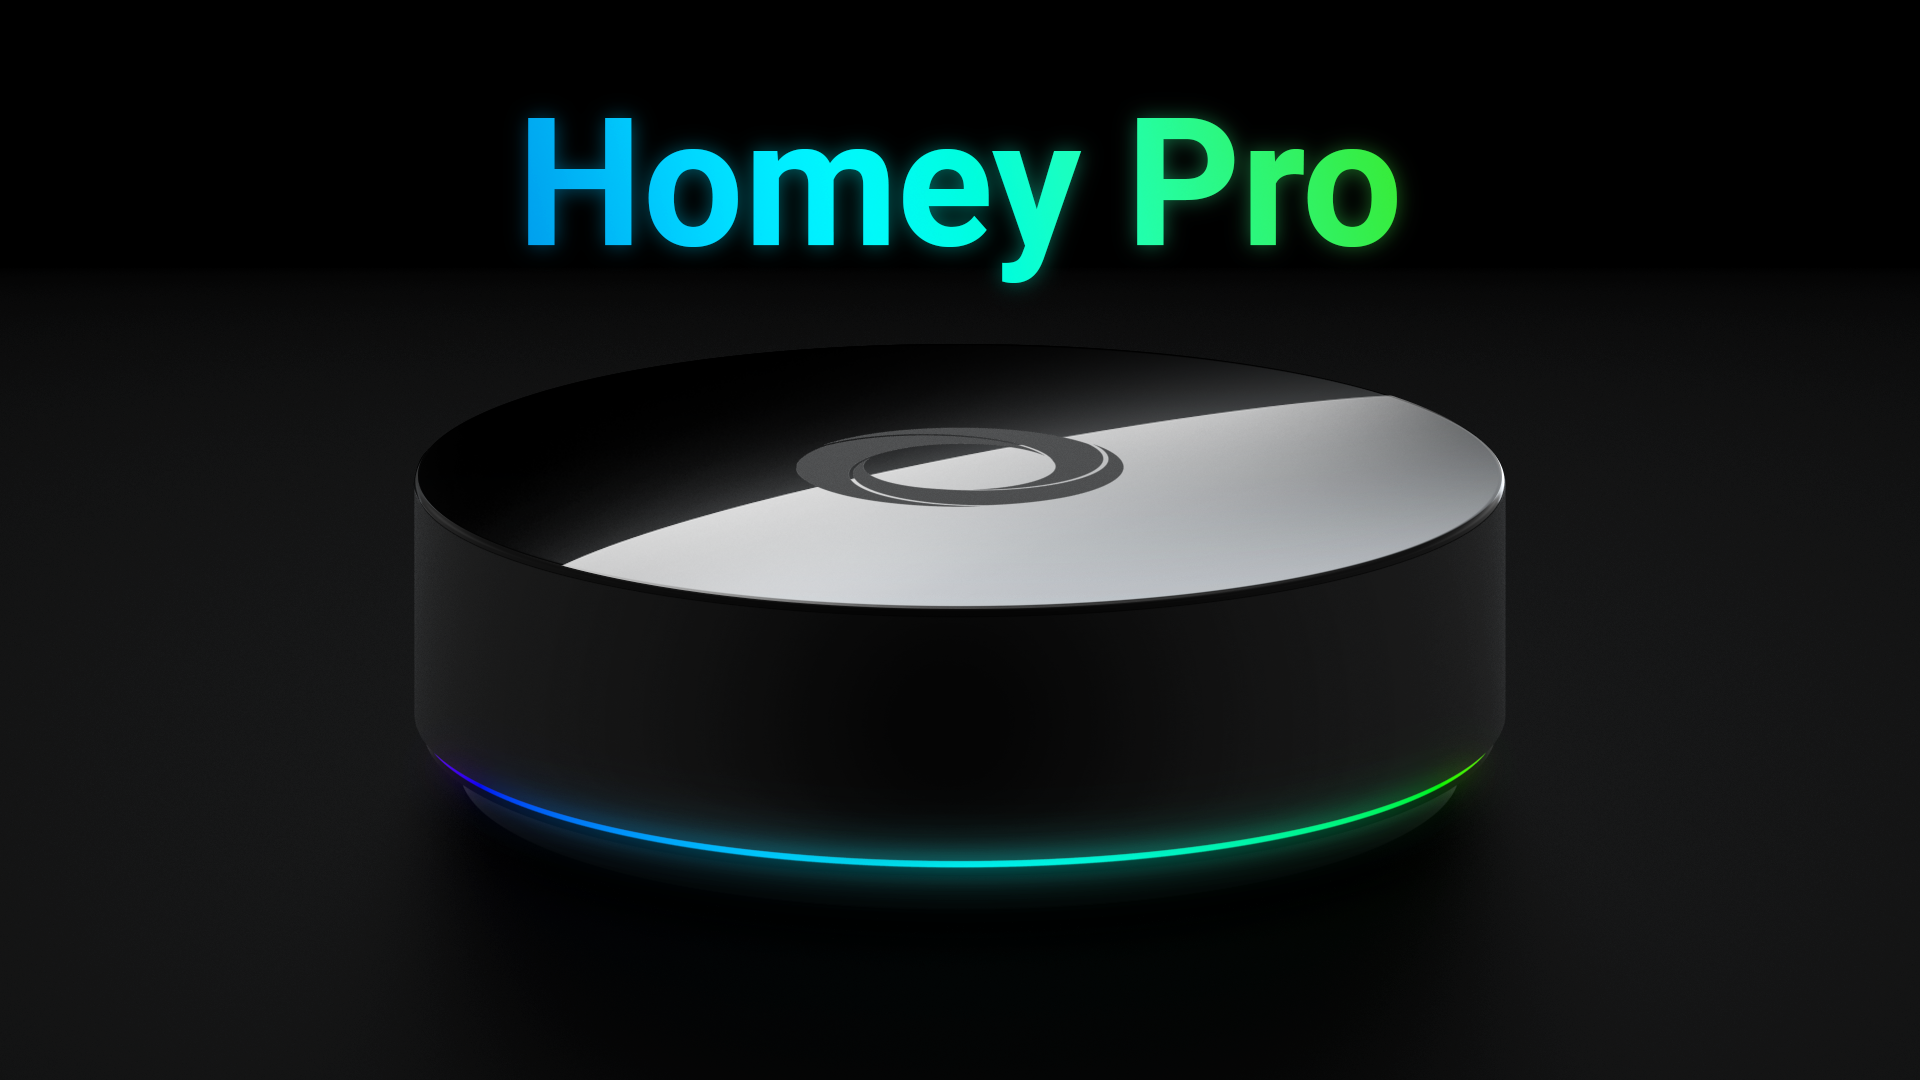 Introducing the allnew Homey Pro Homey